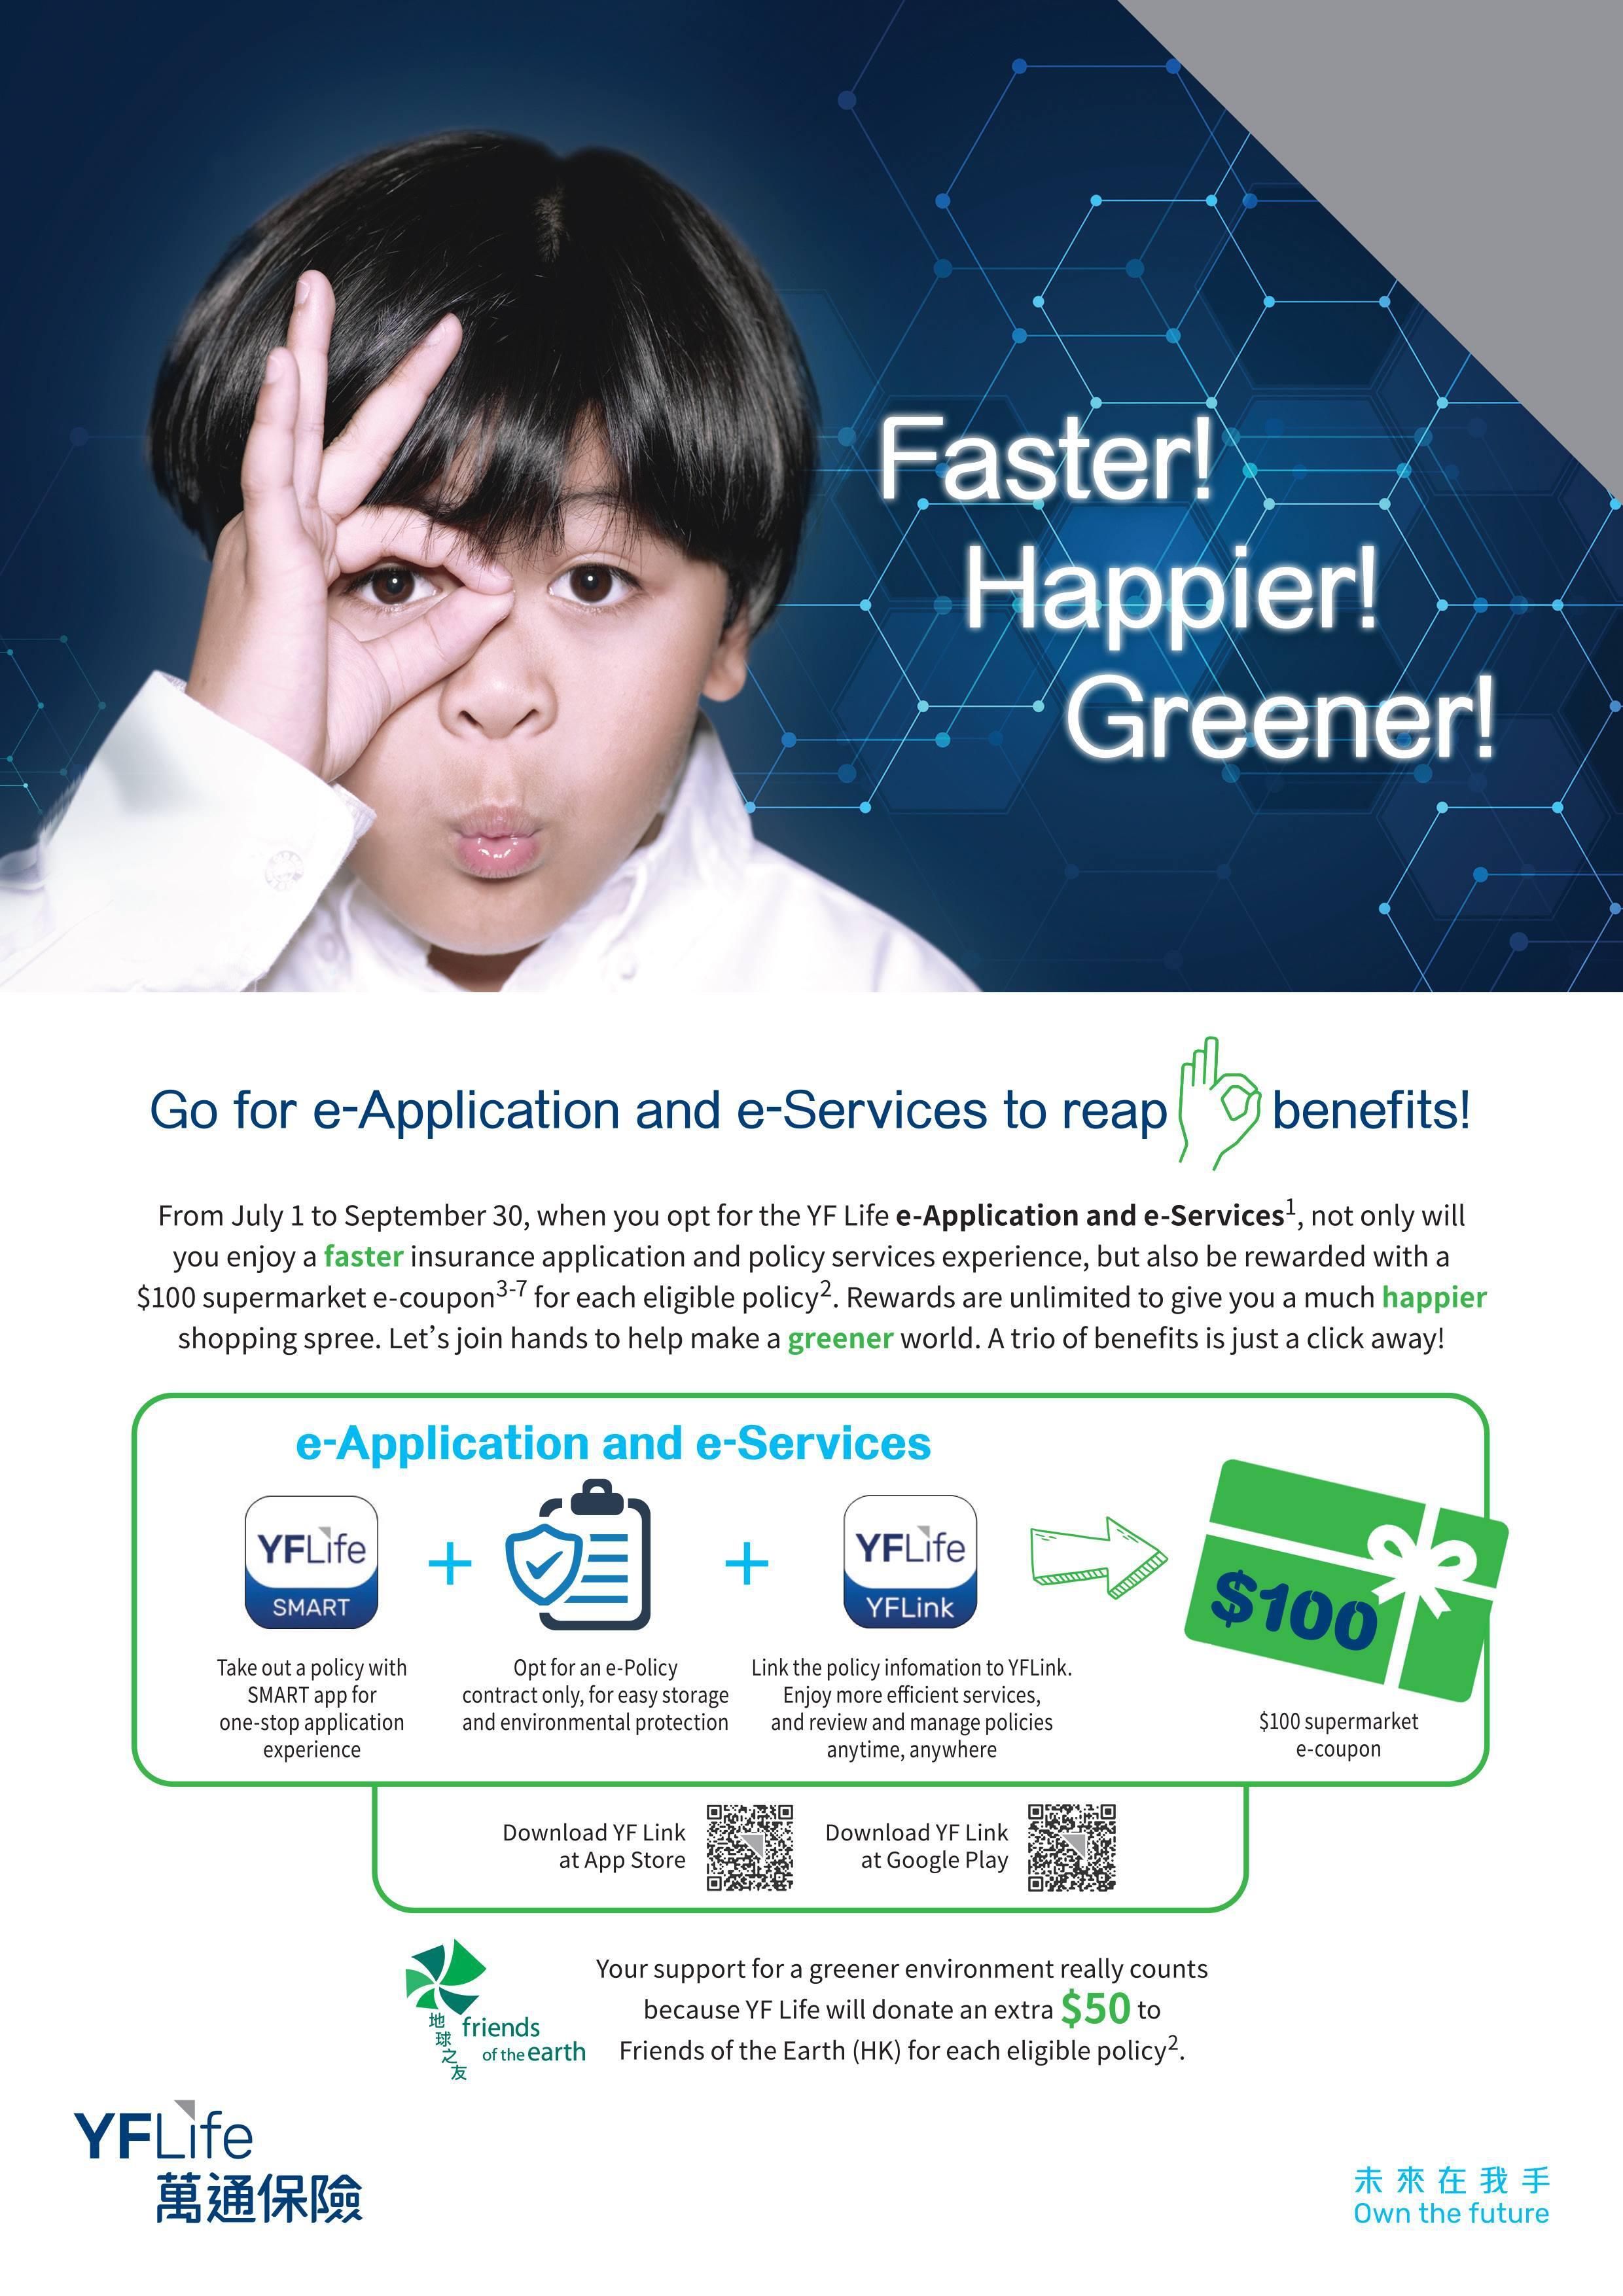 The latest e-Application and e-Services promotion campaign by YF Life generates added value for customers and the Company, as well as for the environment at one go.  